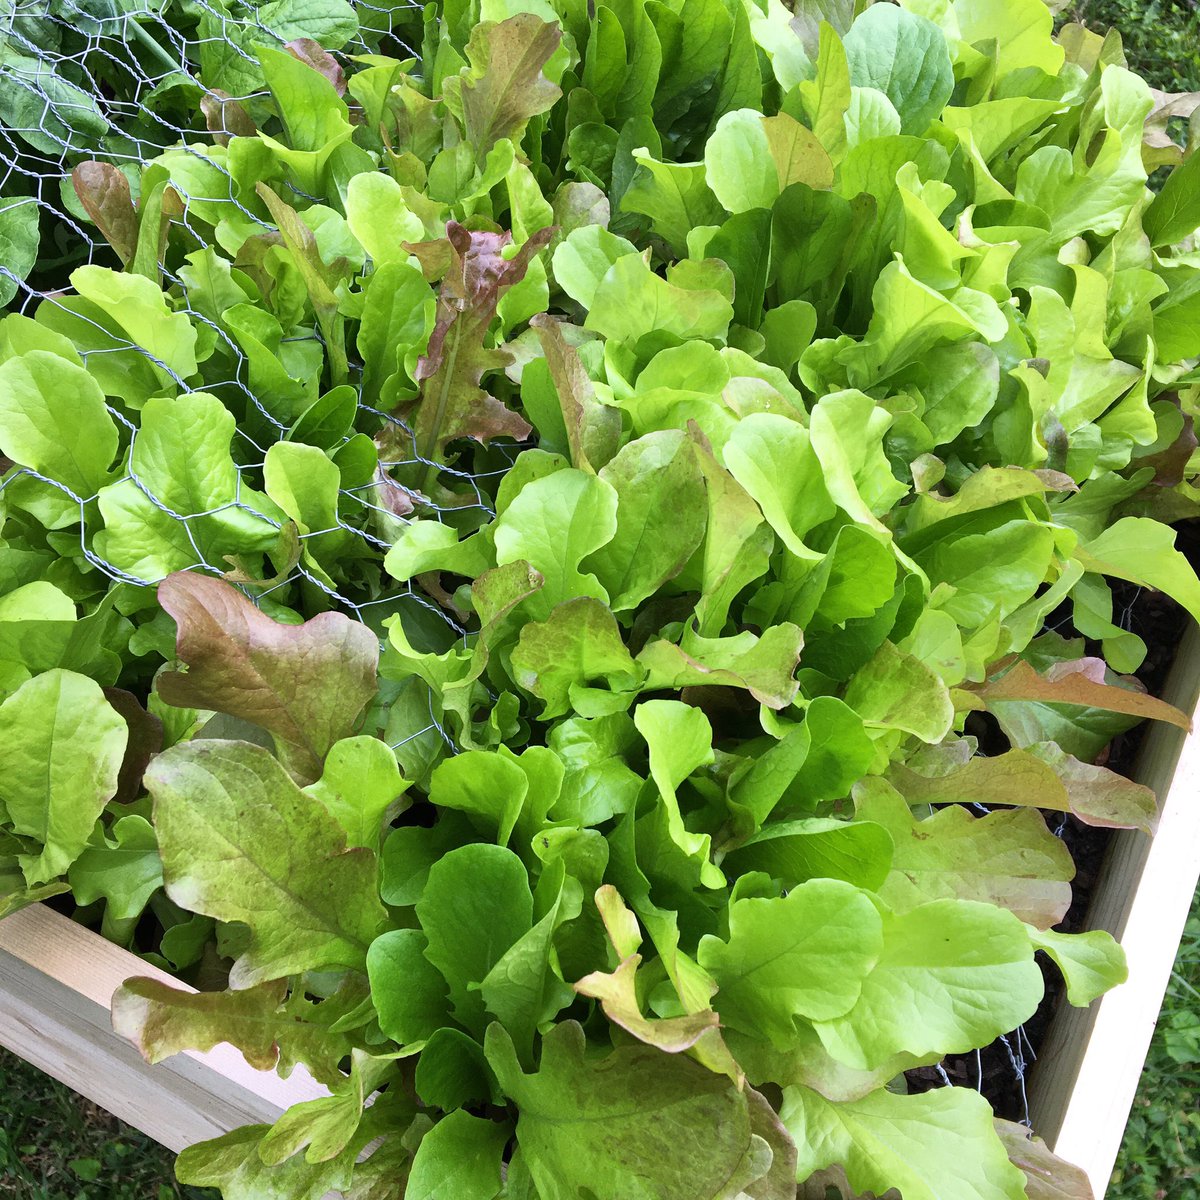 Happy Saturday, friends! Lettuce is growing so well this Spring!🥬💚#homegarden #gardening #lettuce #lettucegrow #garden #gardengoals #gardeningx #gardeningtwitter